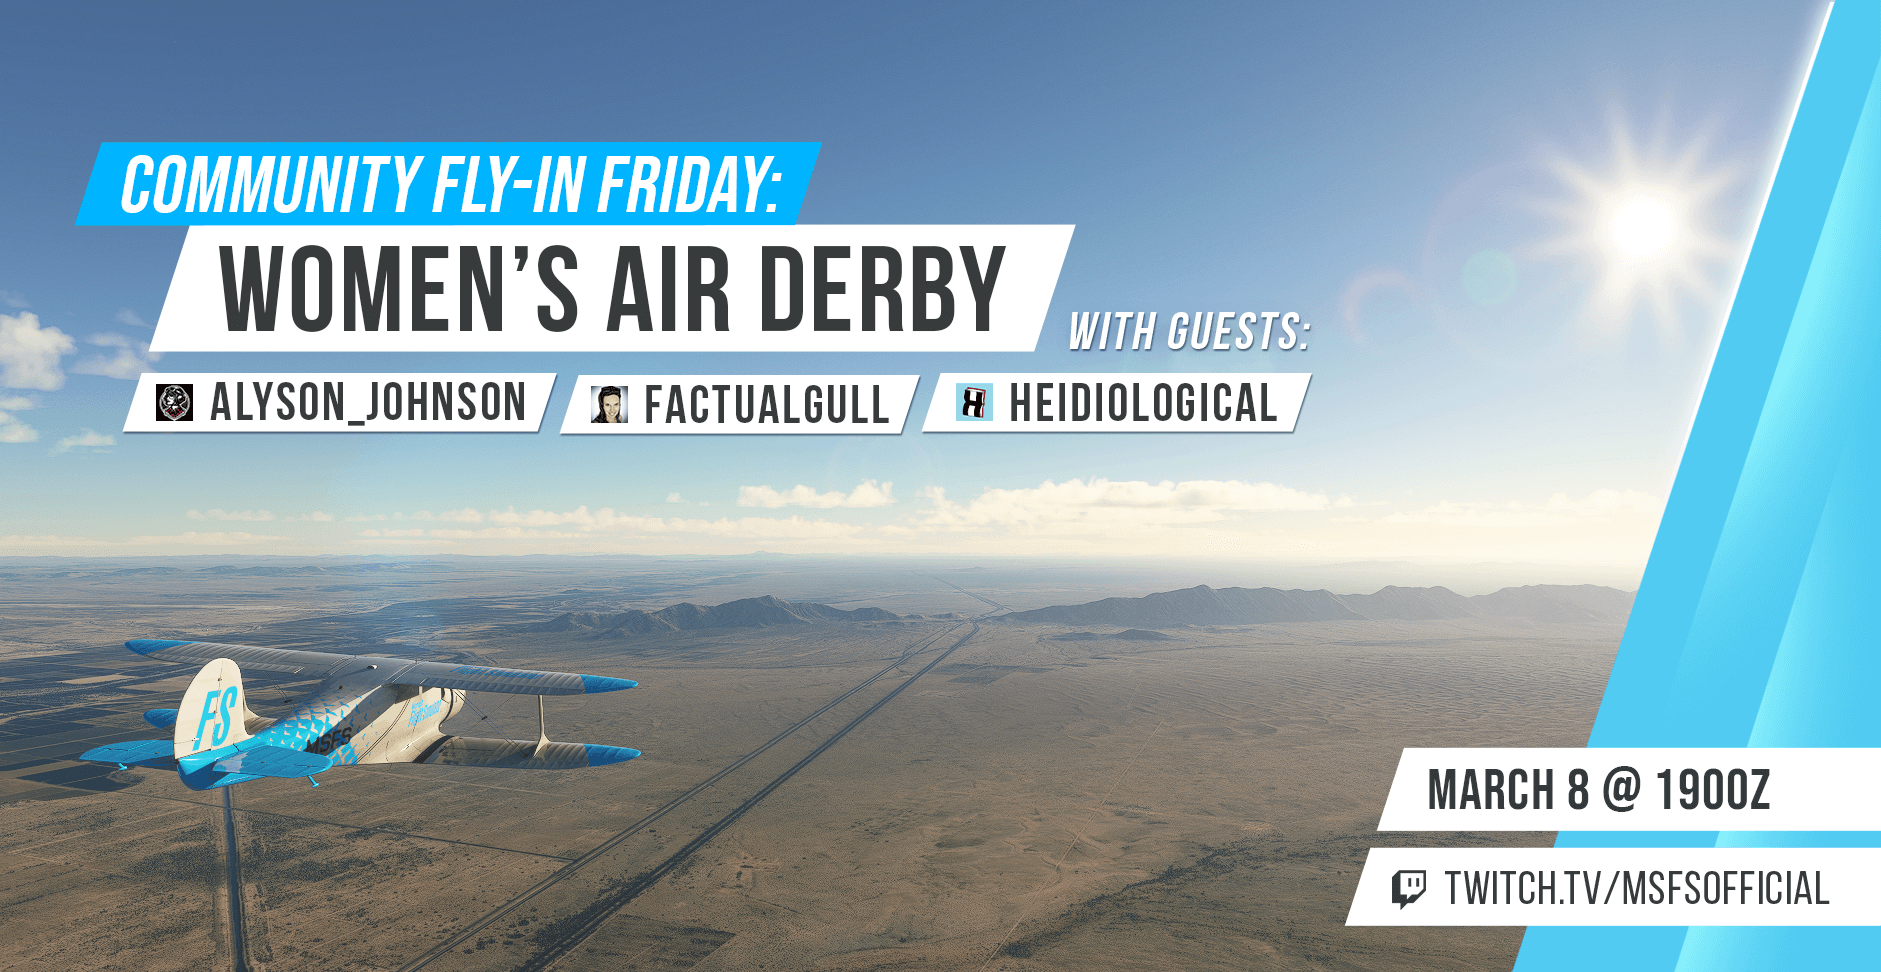 Community Fly-In Friday: Women's Air Derby. March 7th at 1900 UTC. twitch.tv/msfsofficial